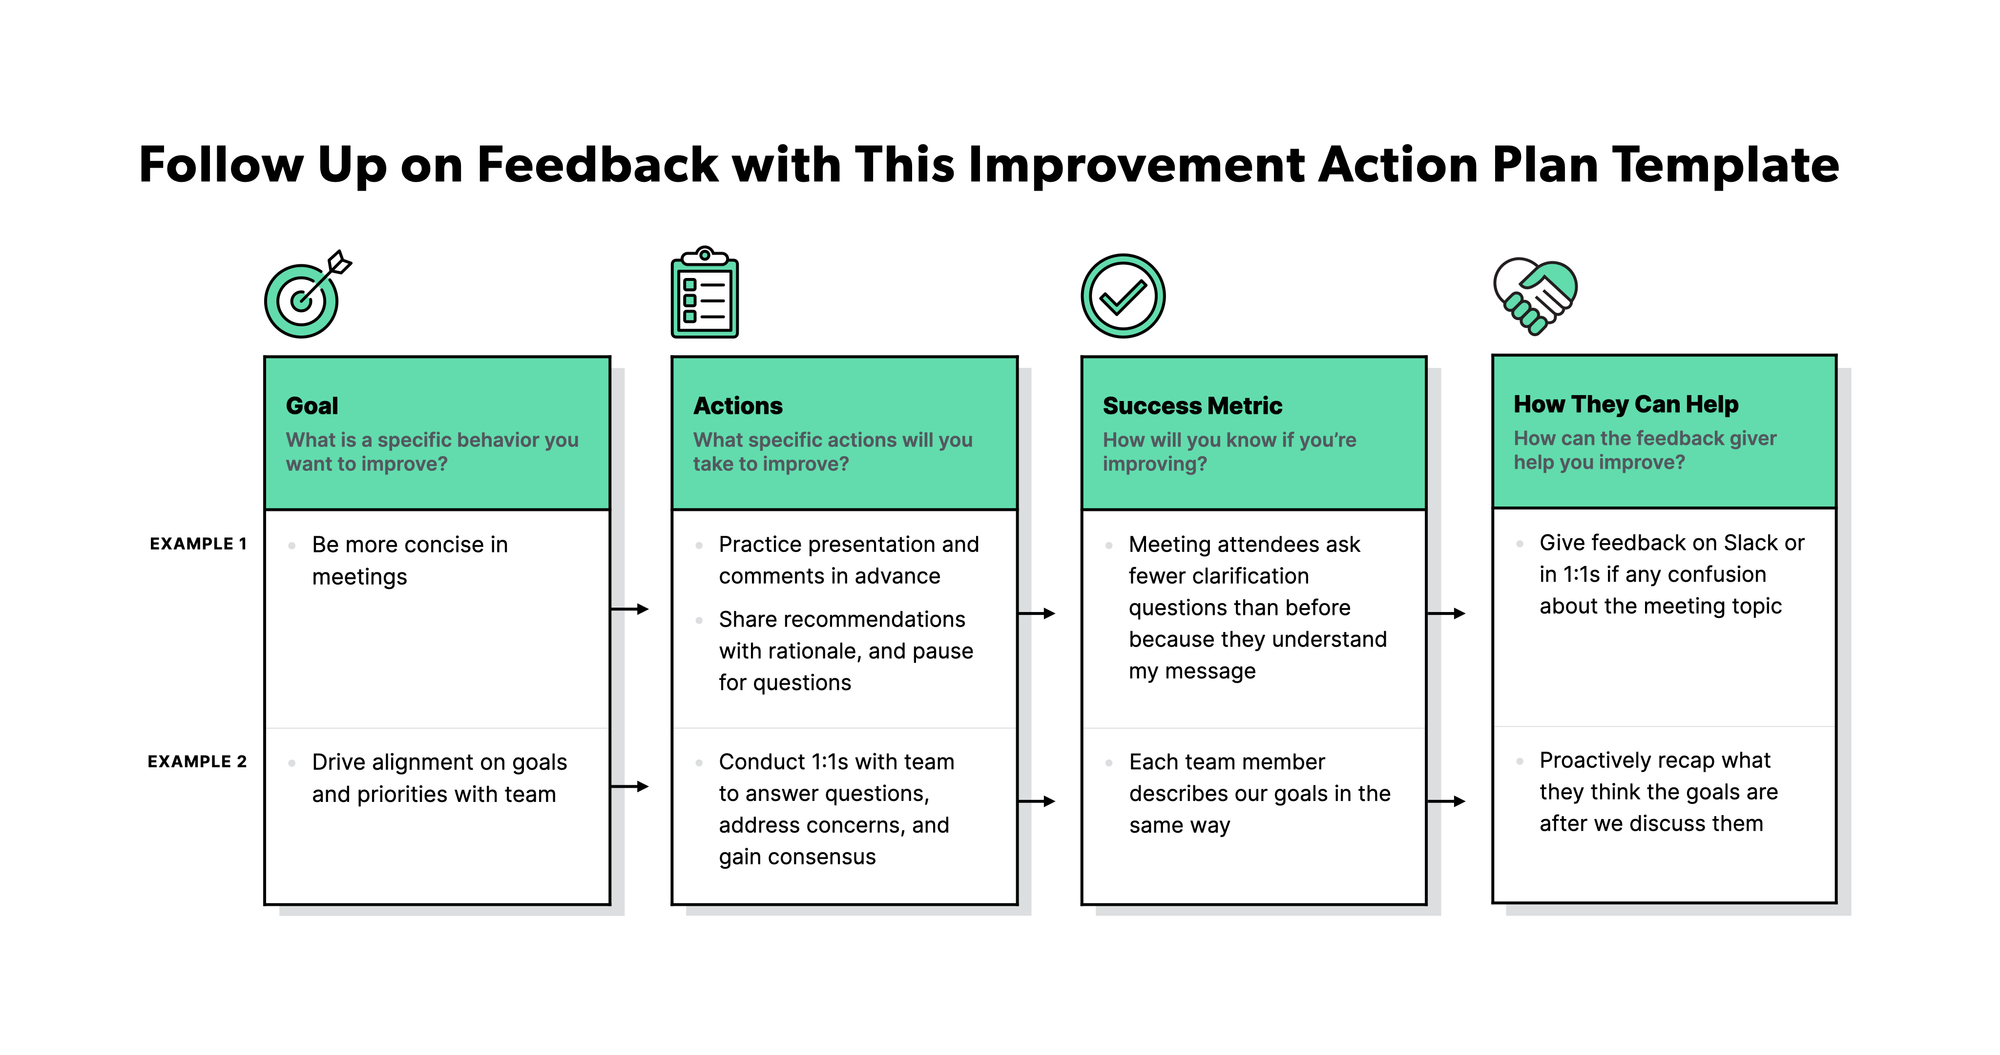 Template with 4 column chart, with two examples underneath each category. Text of chart reads: Goal  Actions Success Metric How they can help [describe 1 specific behavior you want to improve on] [Describe specific actions you’ll take to improve] [How will you know if you’re improving] [How can the feedback giver help you improve] Be more concise in meetings Practice my presentation and comments in advance Share my recommendation with rationale first and then pause to see if people have questions Meeting attendees ask fewer clarification questions than before to help them understand my message Give feedback in 1:1s or via Slack if they felt confused about the message I shared Drive alignment on goals and priorities with team Conduct 1:1s with team to answer questions, address concerns and ensure everyone is in agreement  Each team member will describe our goals in the same way Proactively recap what they think that the goals are after we discuss them